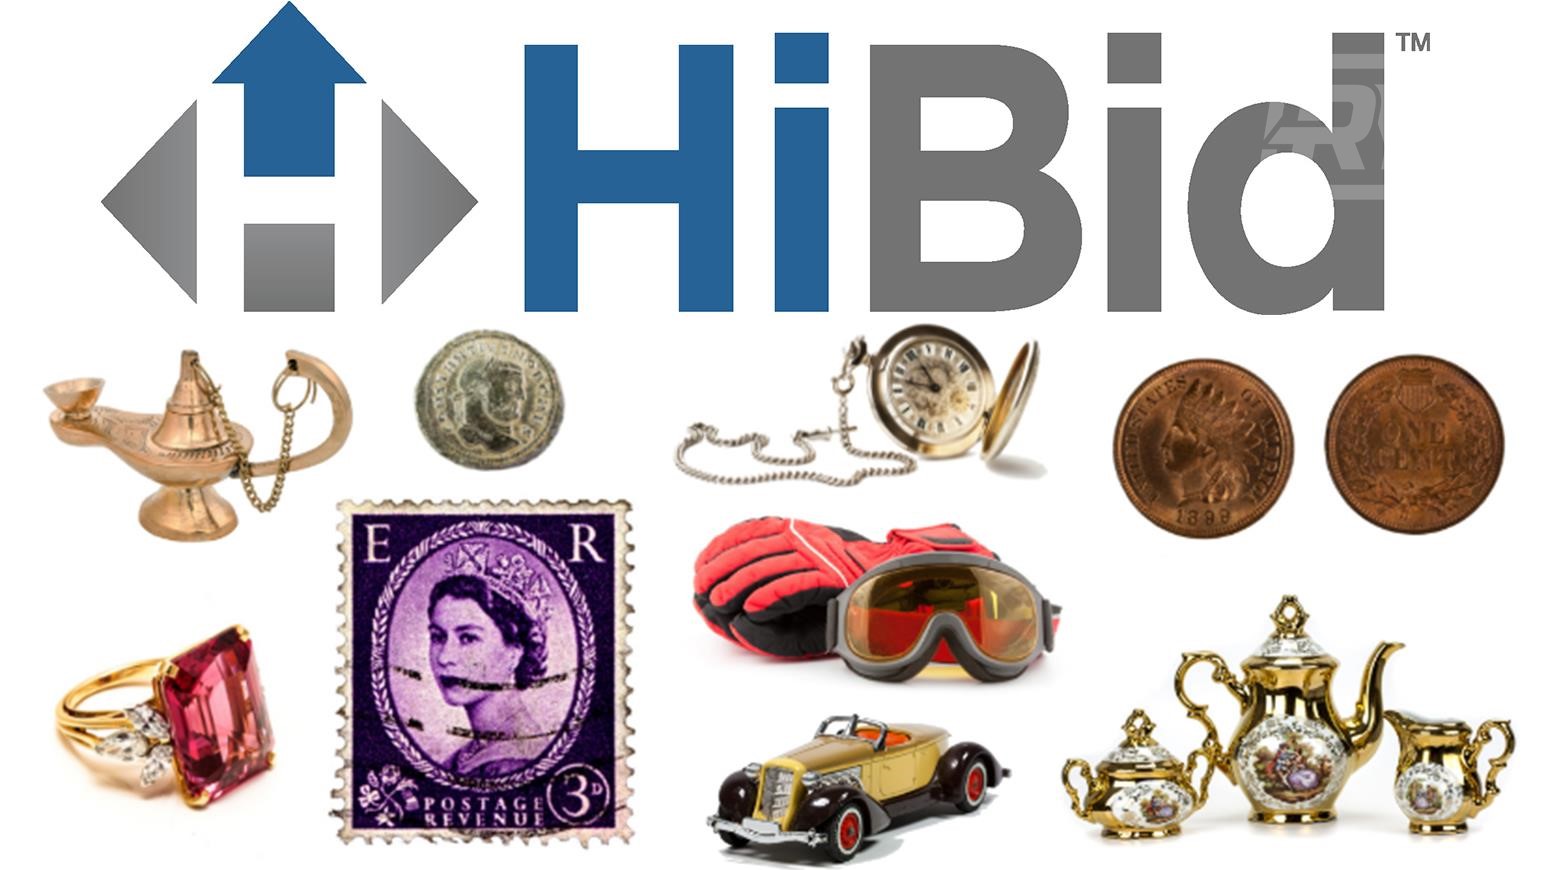 Over $23.6 Million In Auction Goods Sold Through HiBid.com This Week